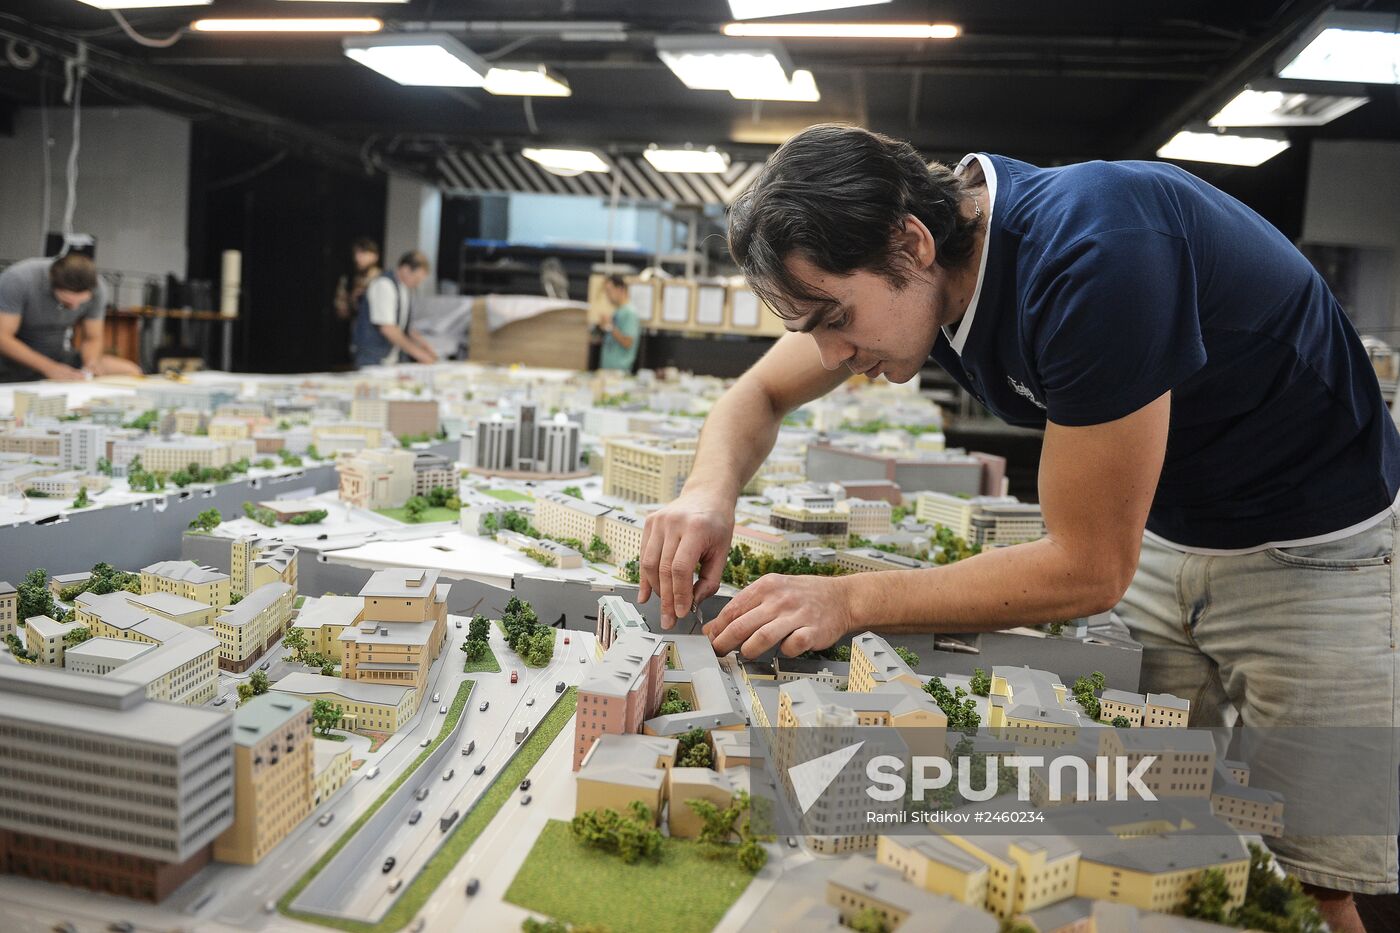 Media preview of Moscow model